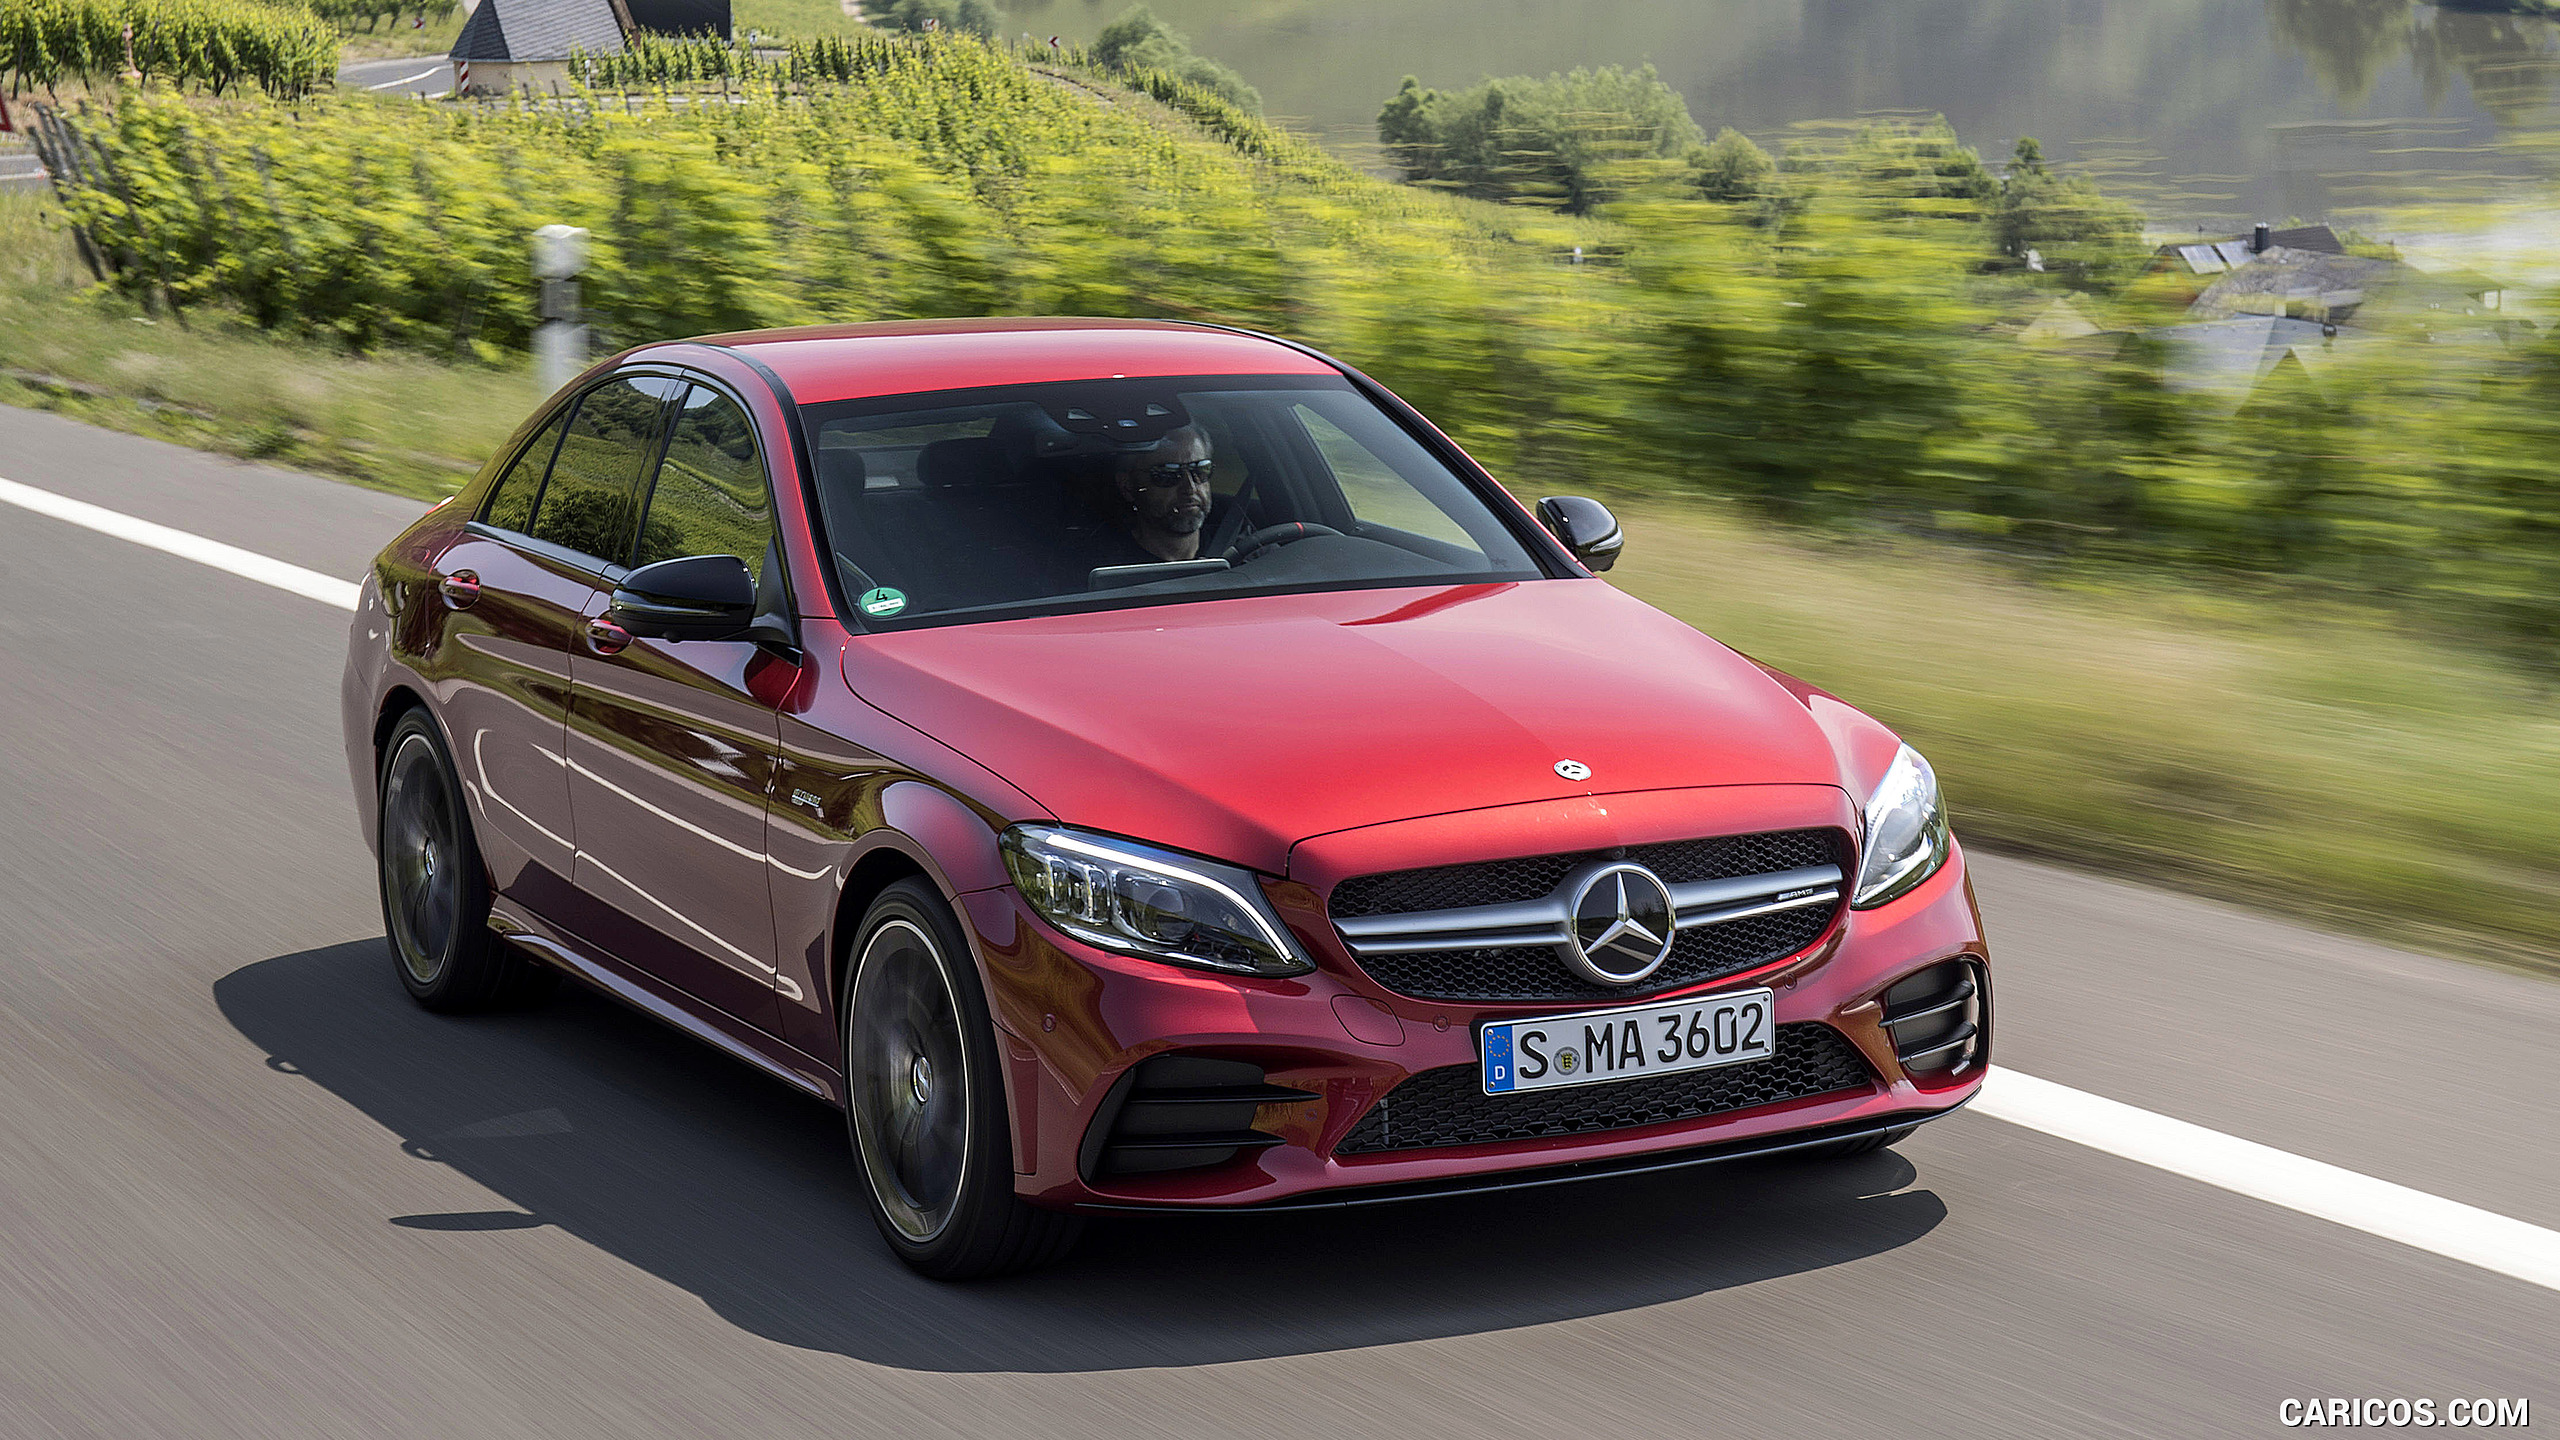 2019 Mercedes-AMG C43 4MATIC Sedan (Color: Hyacinth Red) - Front Three-Quarter, #33 of 192